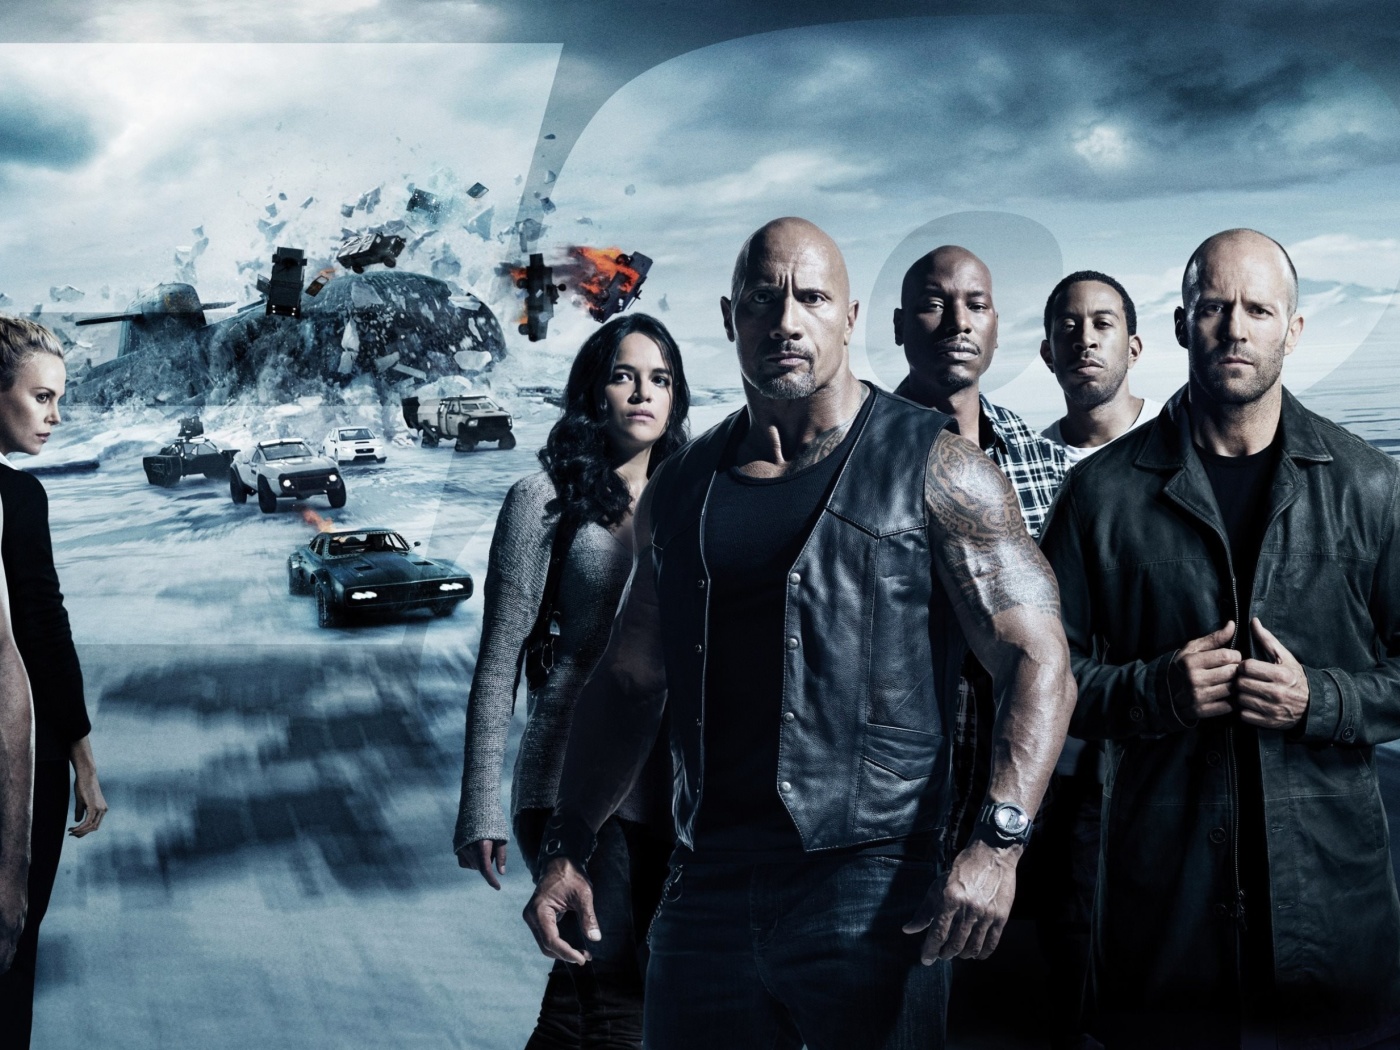 Обои The Fate of the Furious with Vin Diesel, Dwayne Johnson, Charlize Theron 1400x1050